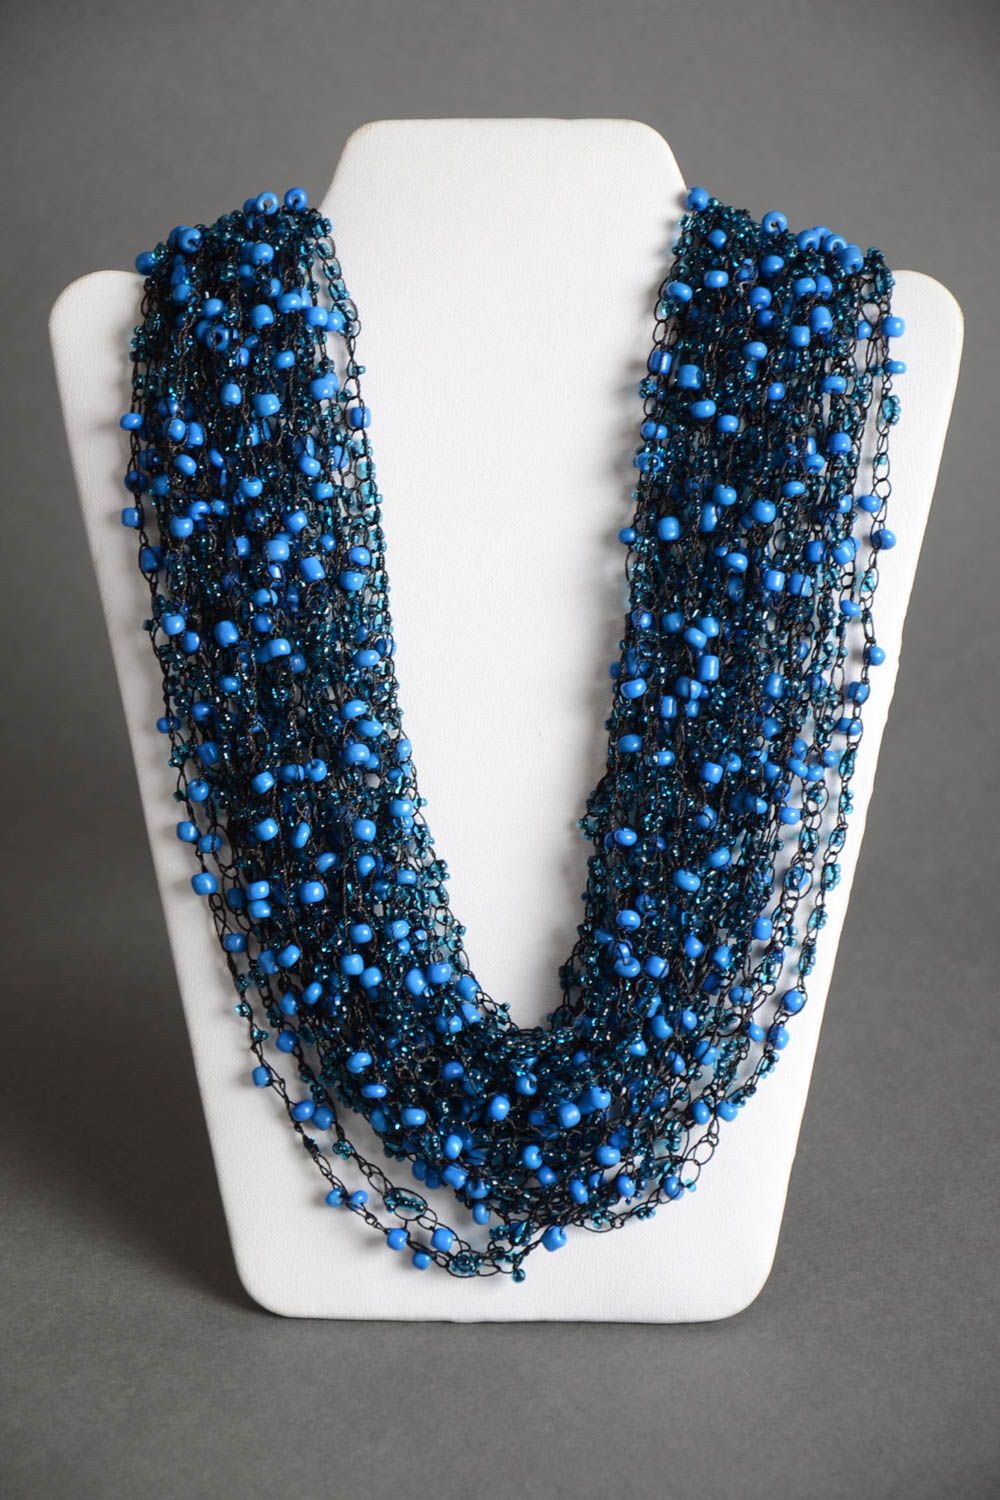 Handmade massive volume necklace crocheted of beads in dark blue color palette photo 2